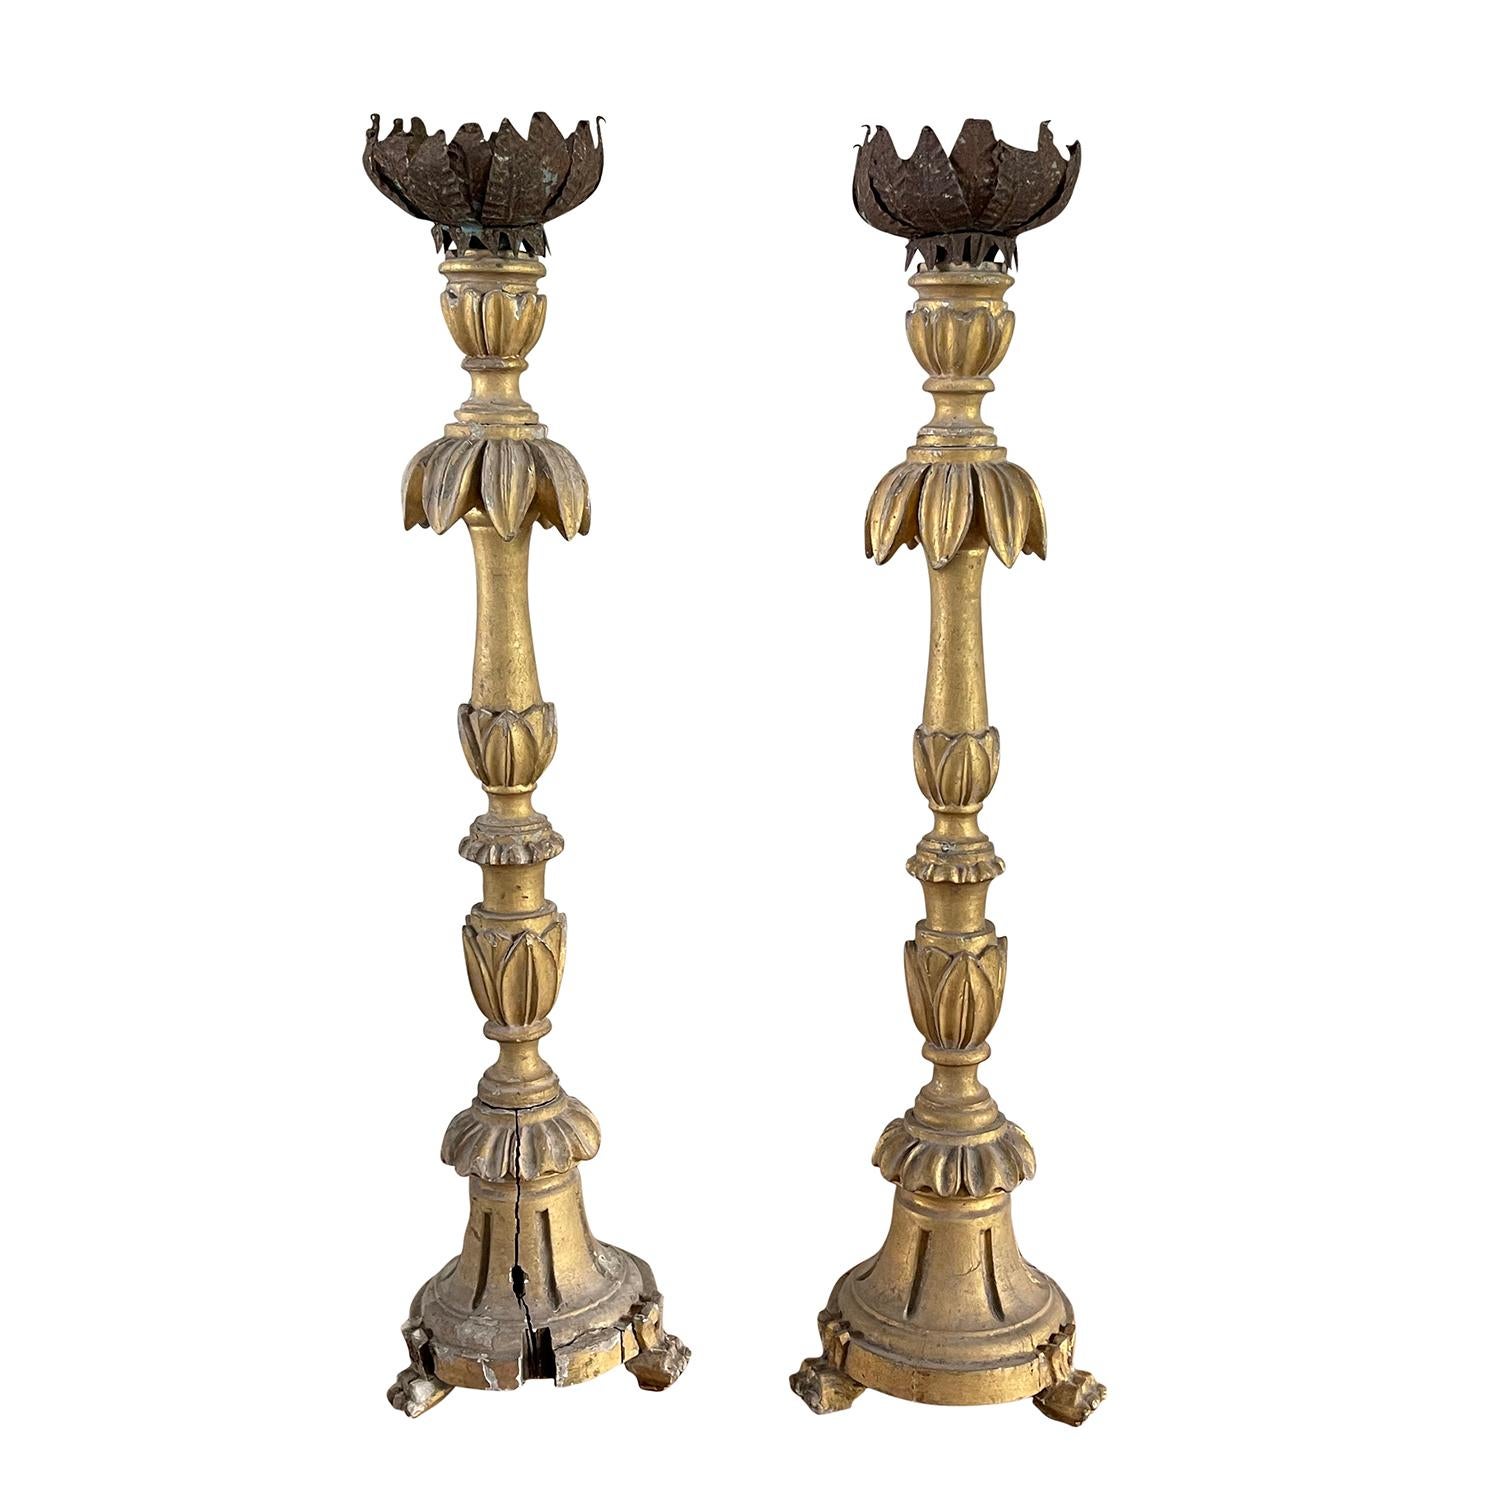 An antique pair of mid 19th century French candle holders with delicate Pinewood carvings set on a tripod base, in good condition. The structure has the original polychrome finish in silver and gold. The candle holders are topped with a metal plate